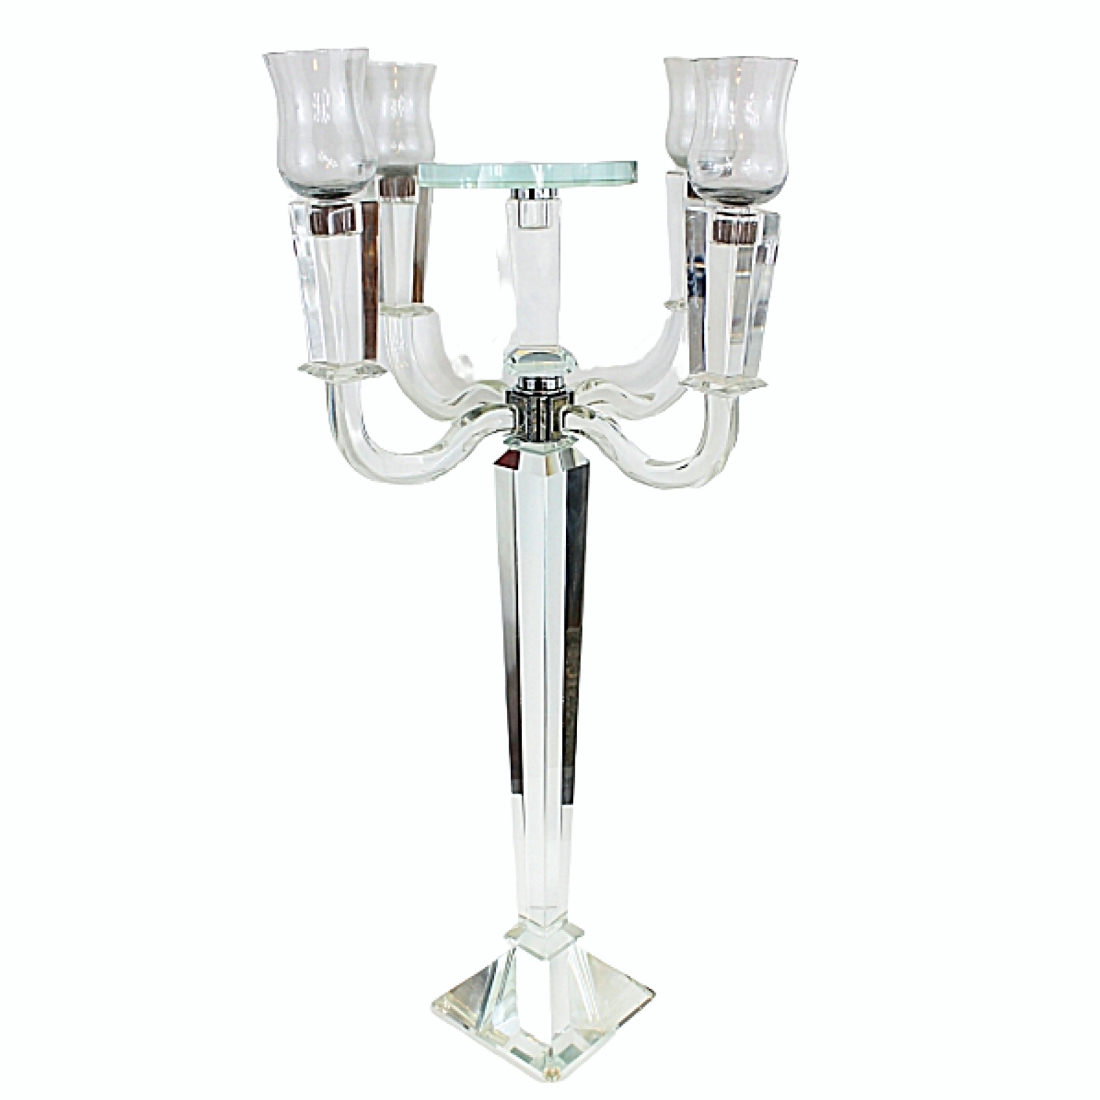 Crystal Candelabra with crystal plate in the middle with 4 glass votive holders 30 inch tall # 110091